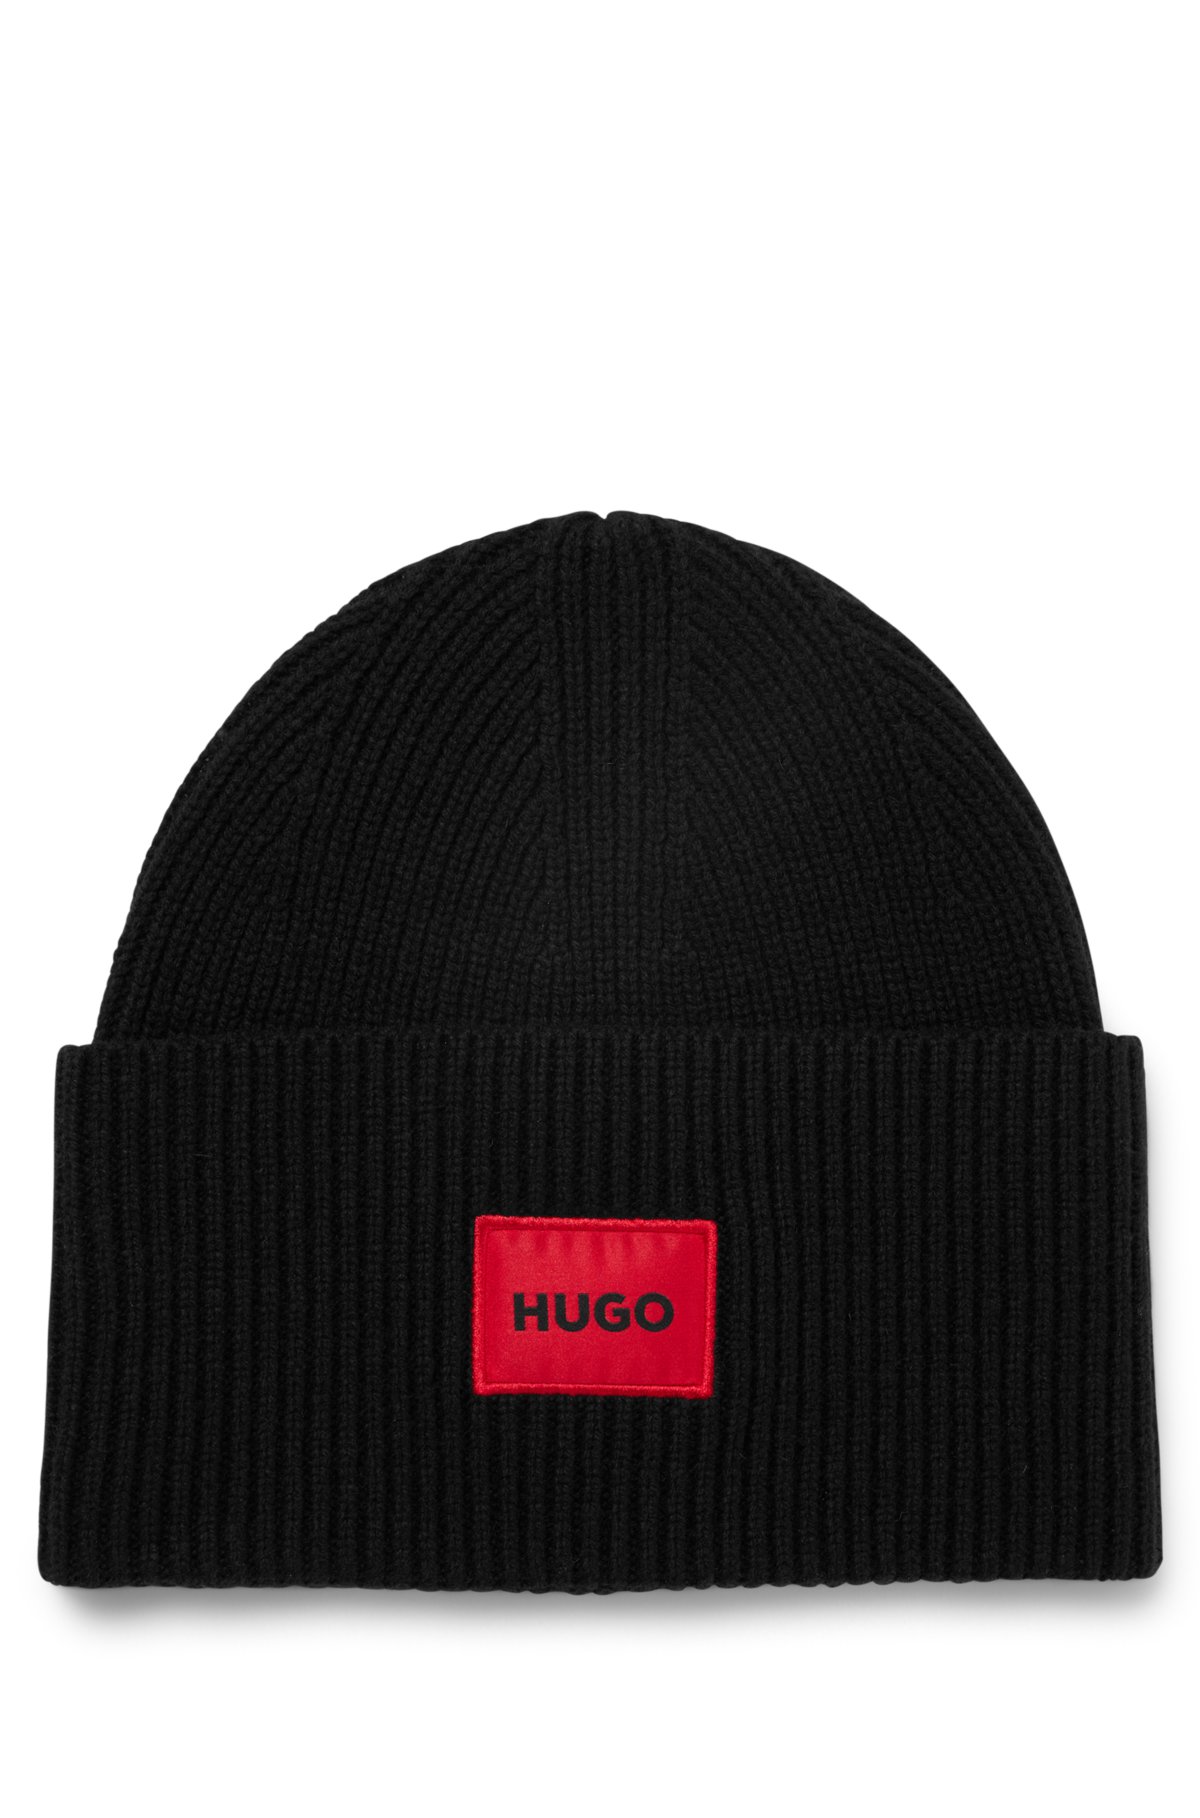 HUGO - label logo Wool-blend red hat beanie with